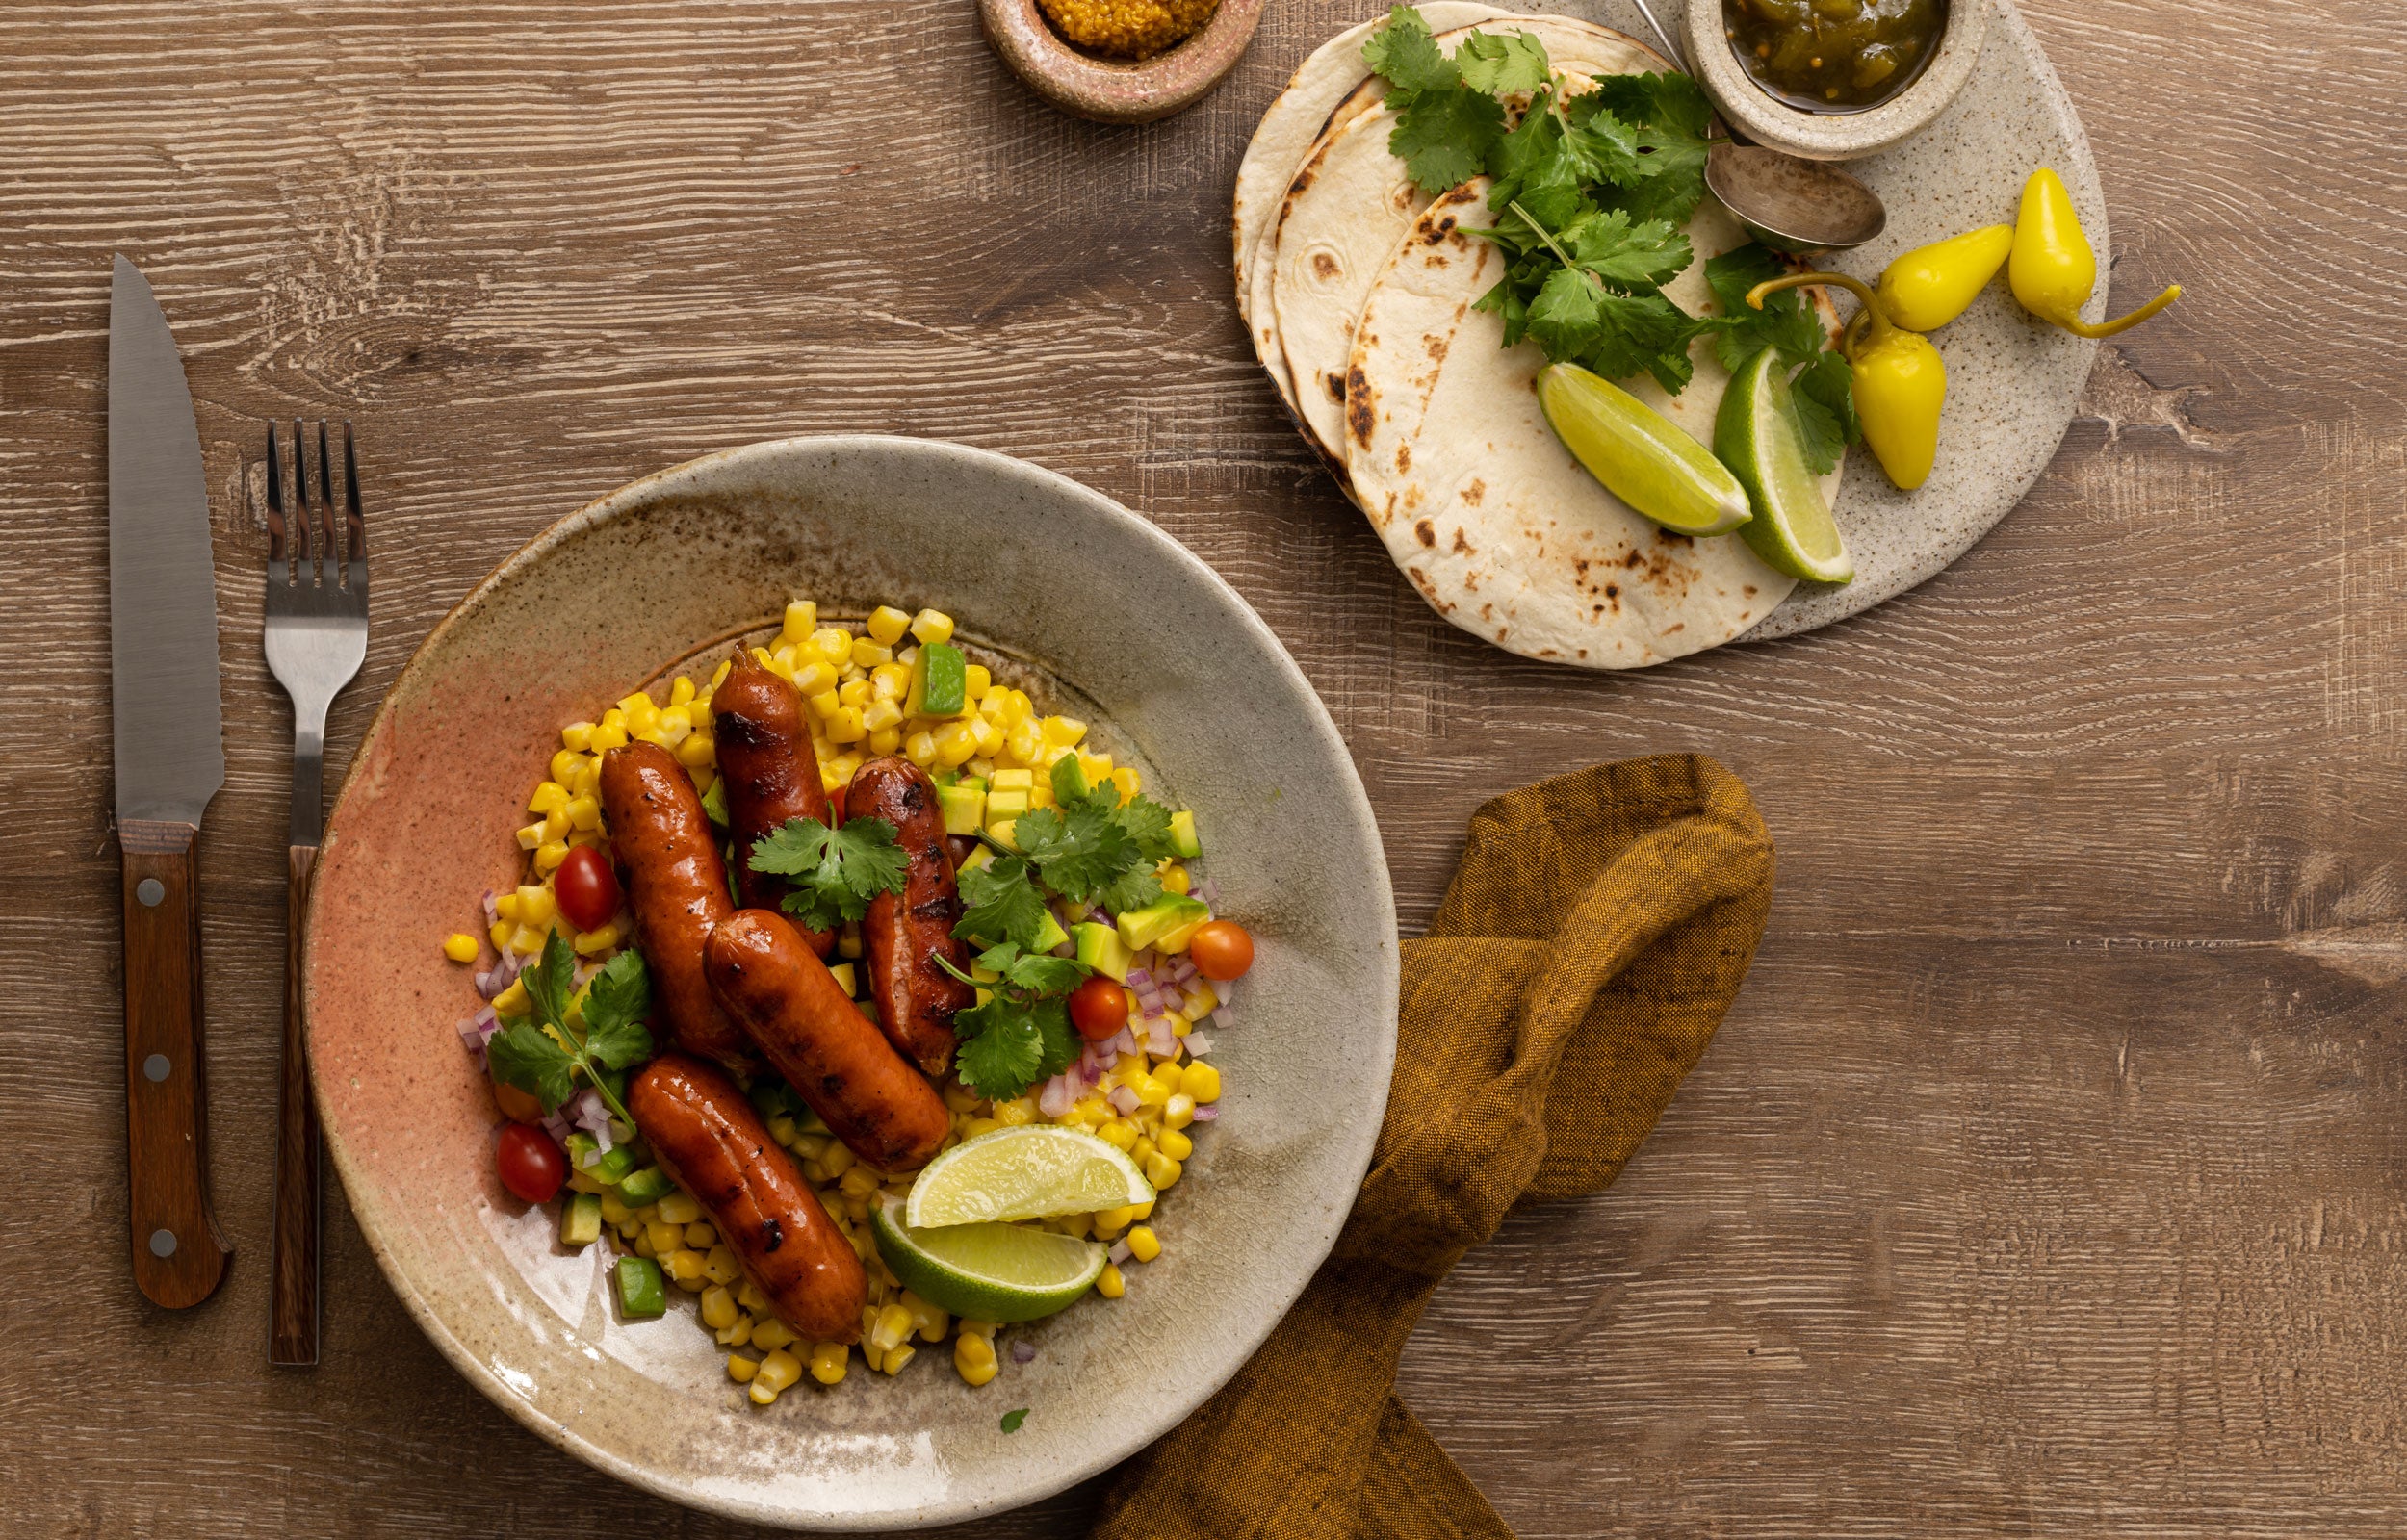 Gotzinger Smallgoods on Mexican Dish with Corn and Tortillas